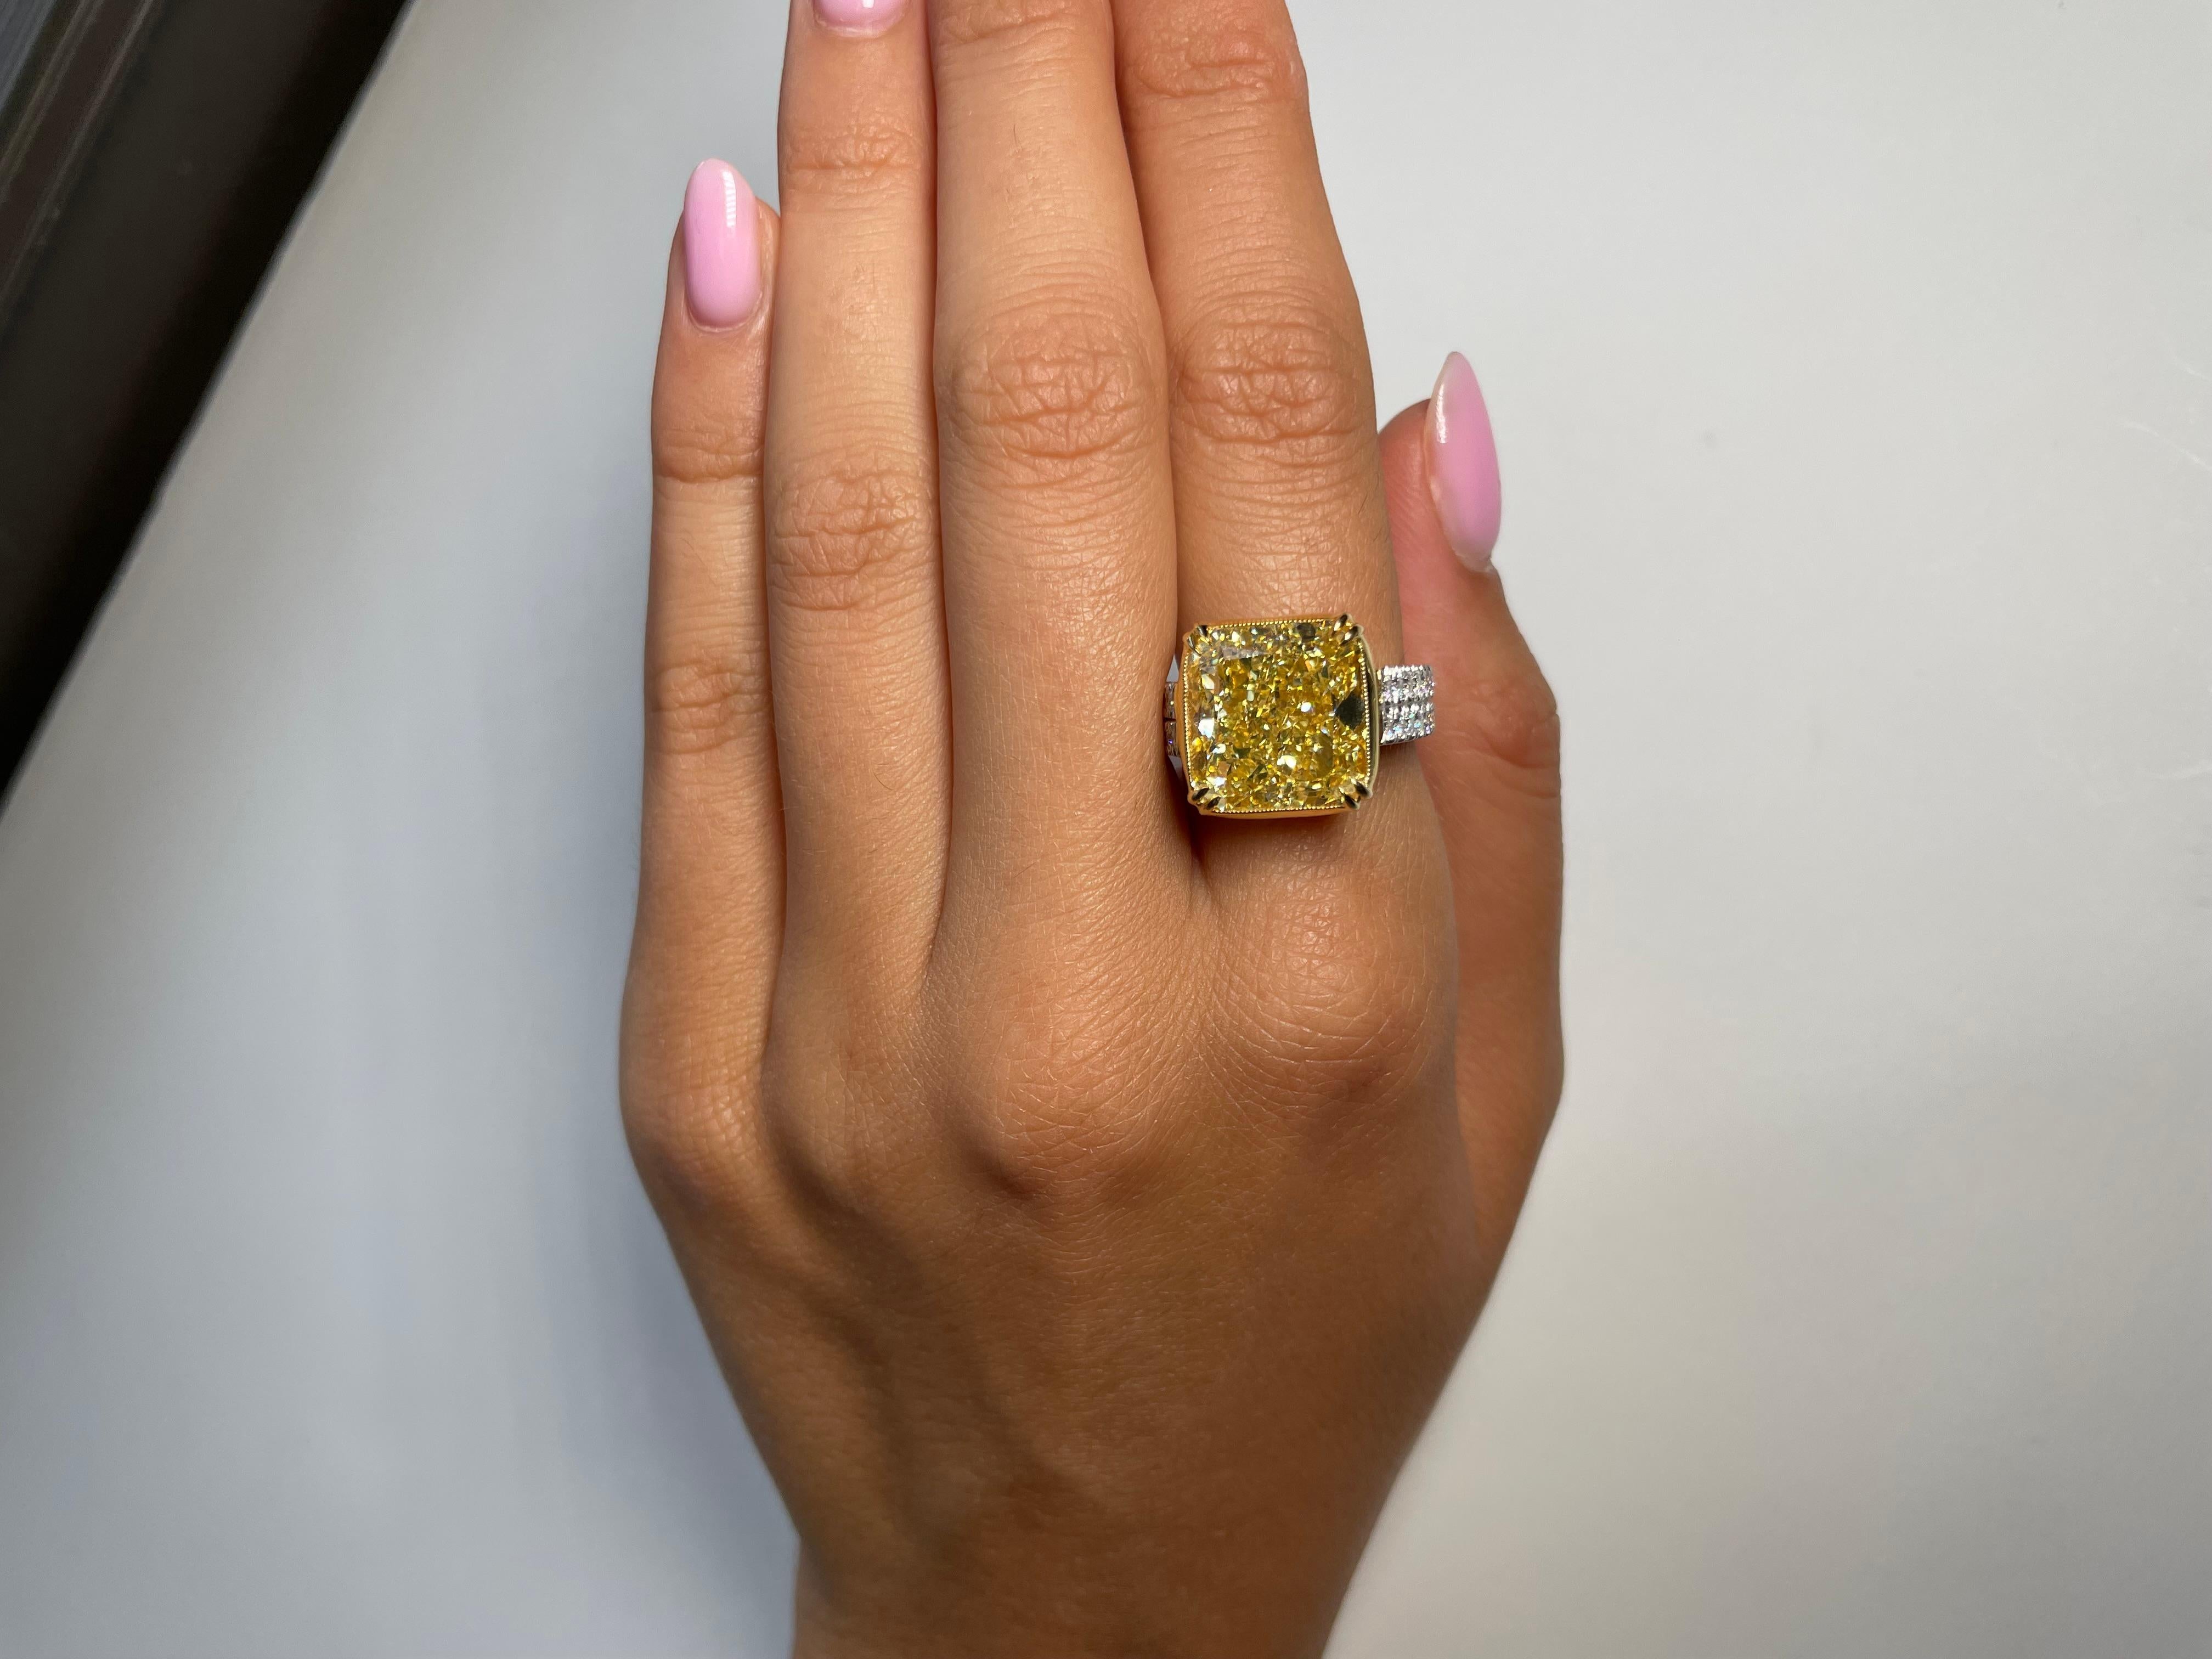 Introducing an extraordinary Contemporary-style diamond ring with a total weight of 12.82 Carats, perfect for engagements and cocktail events. Its exceptional design is sure to captivate onlookers both close and afar. Featuring a GIA Certified 11.81